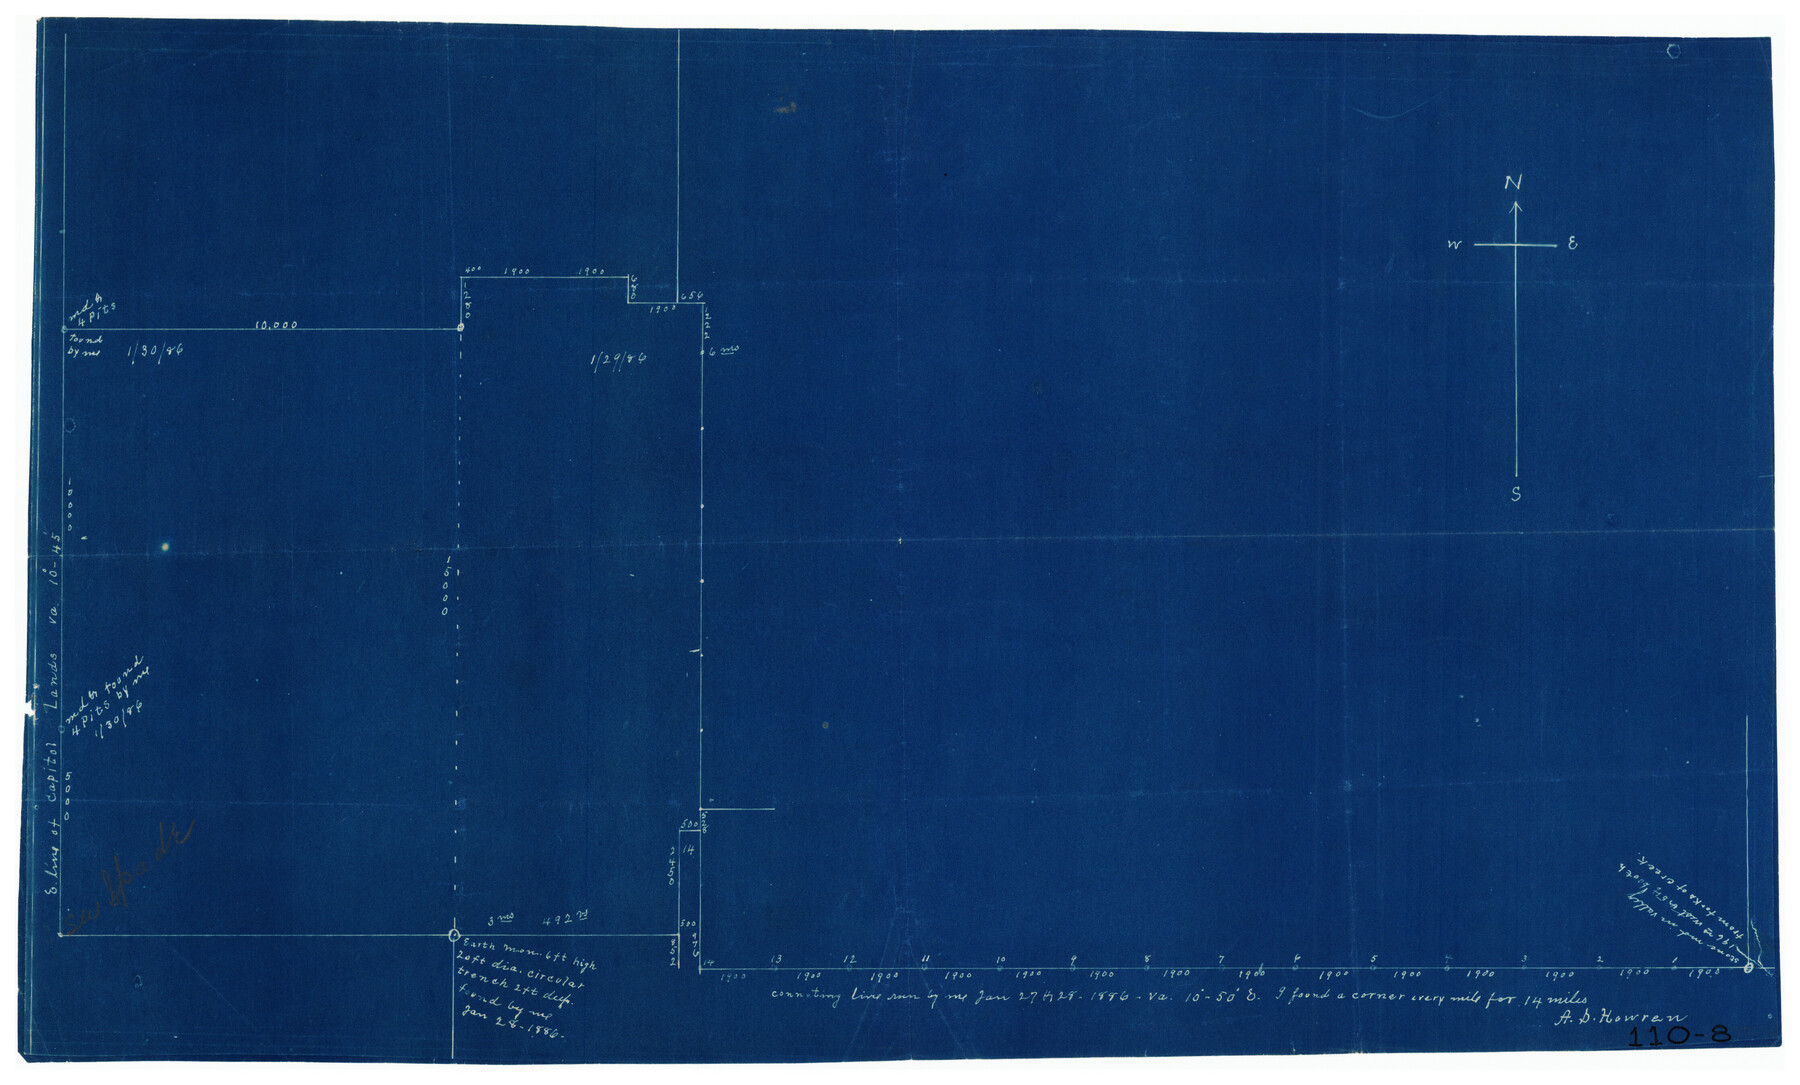 91117, [Working Sketch Showing Southwest Part of the County], Twichell Survey Records